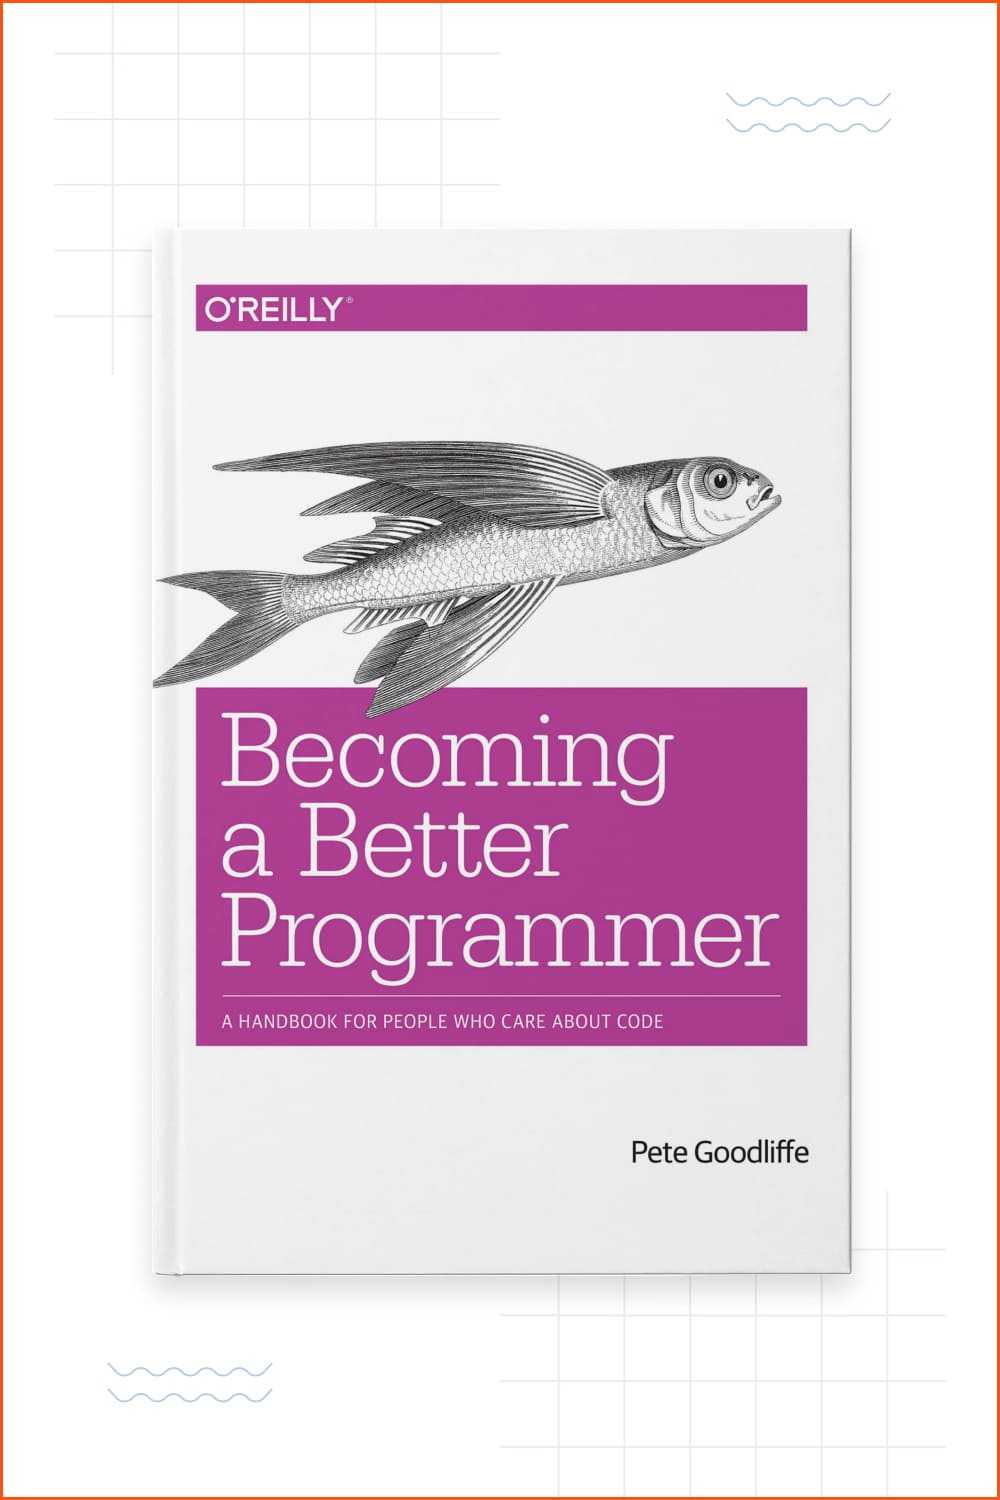 Book cover 'Becoming a Better Programmer'.